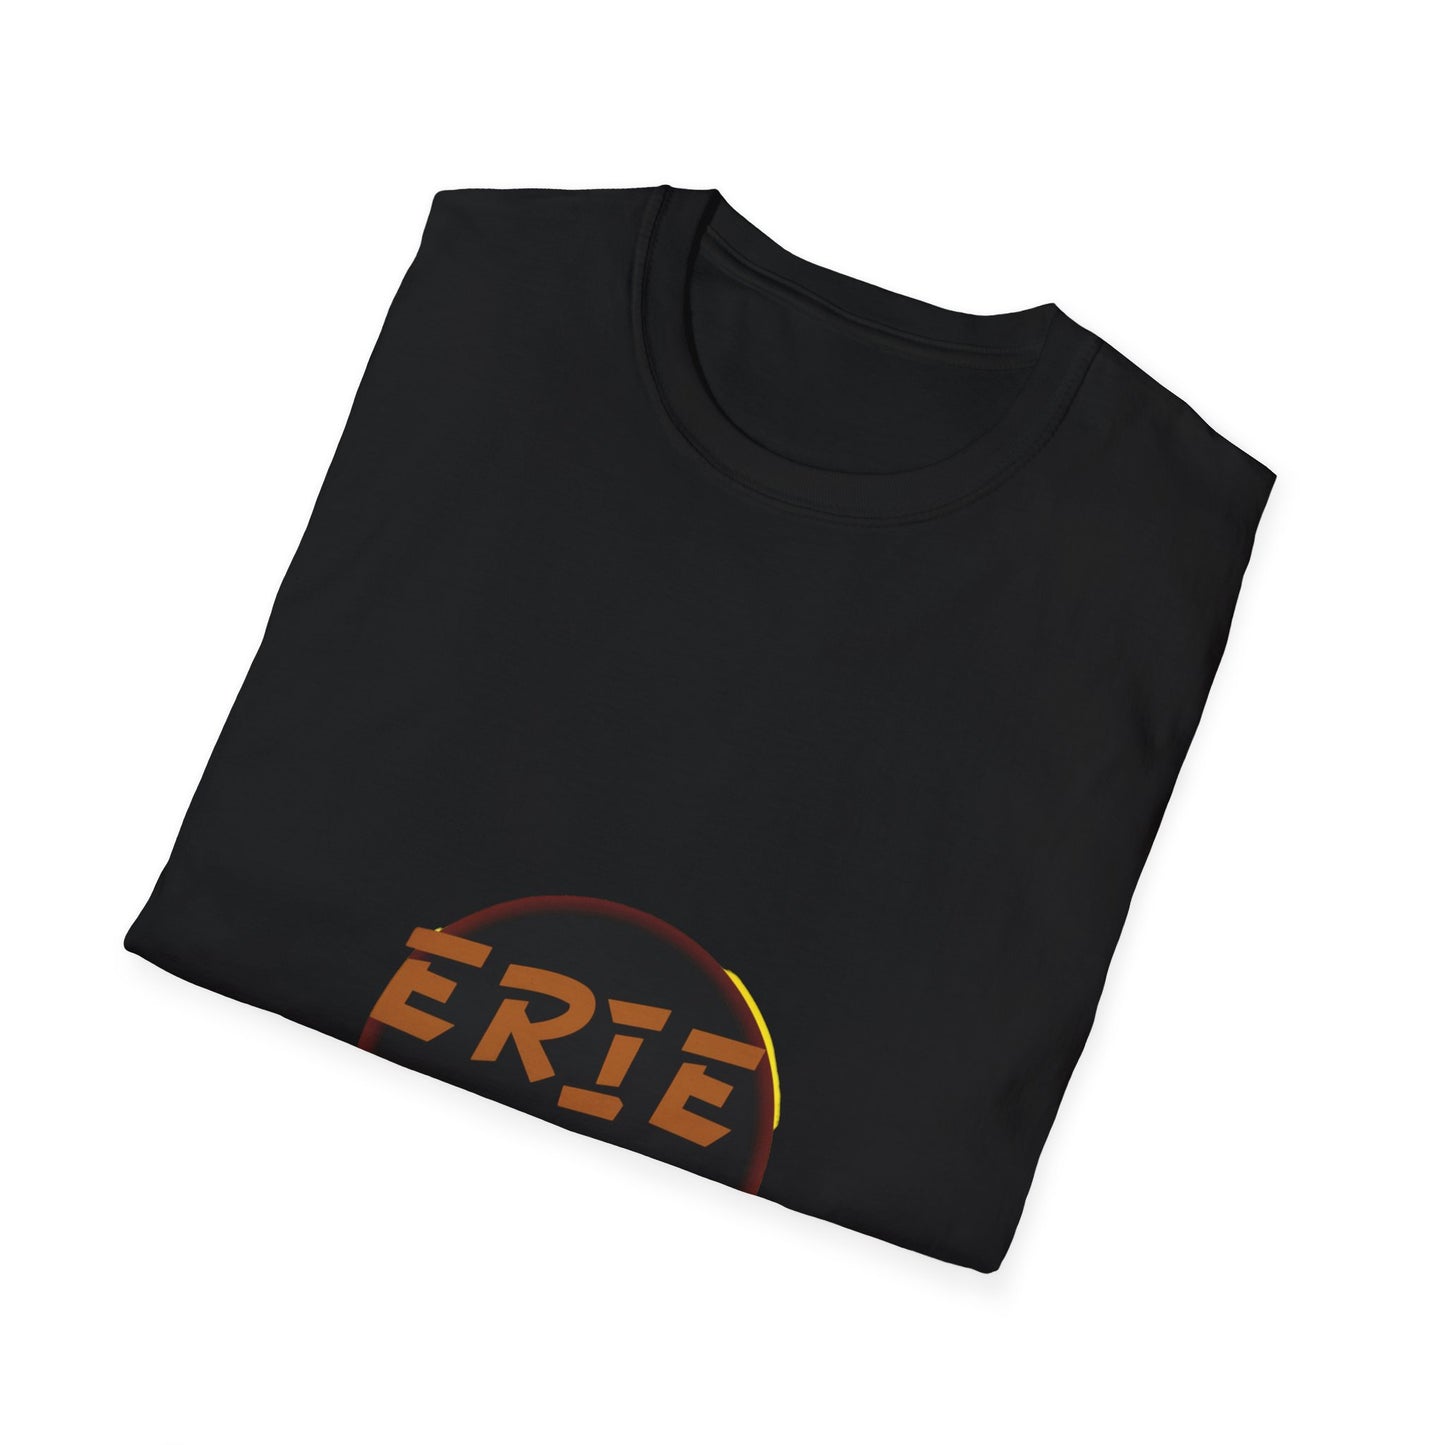 Erie Eclipse Emblem, Unisex Softstyle Tee, Fashionable Graphic T-Shirt, Comfort Fit